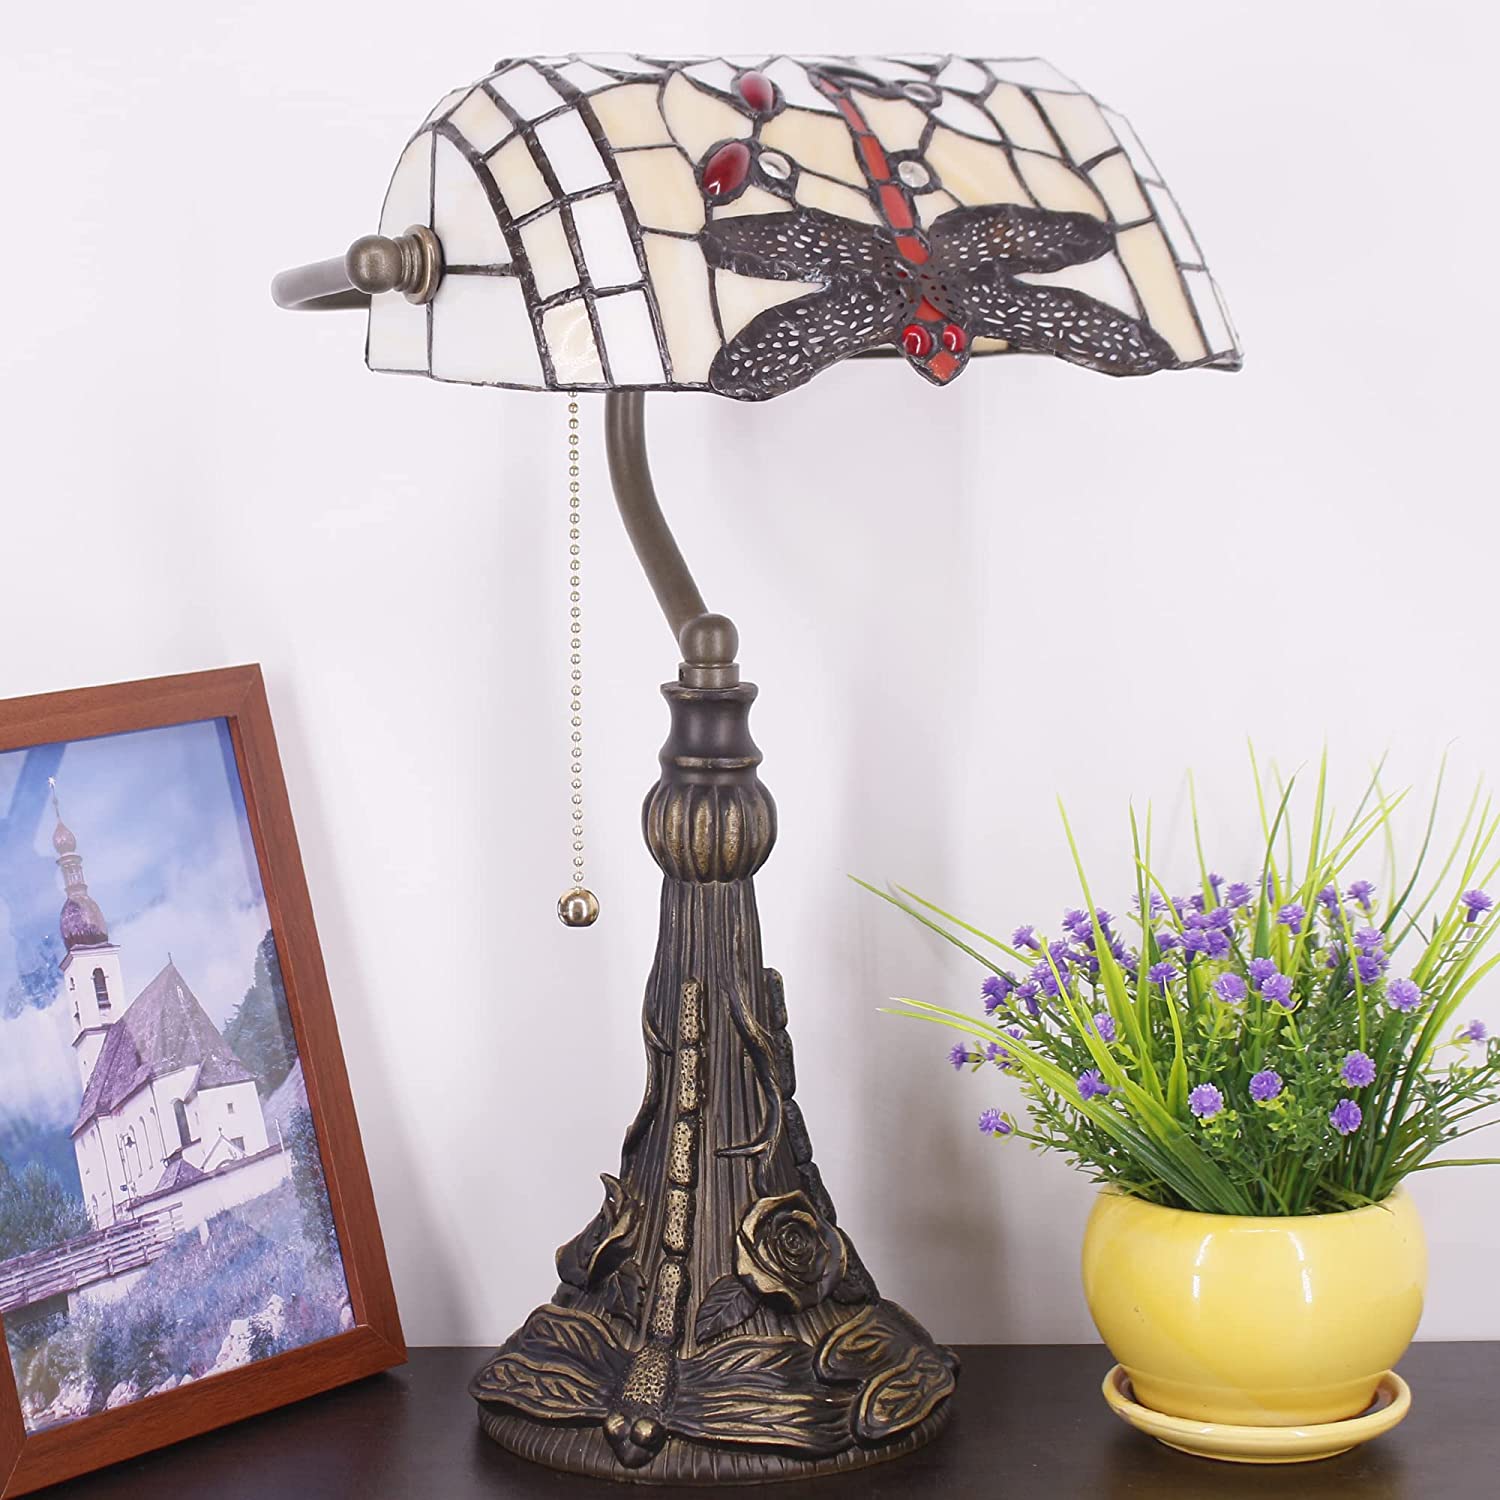 Werfactory® Banker Lamp Tiffany Desk Lamp Amber Dragonfly Style Stained Glass Table Lamp, Adjustable Luxury Memory Piano Lamp 15" Tall